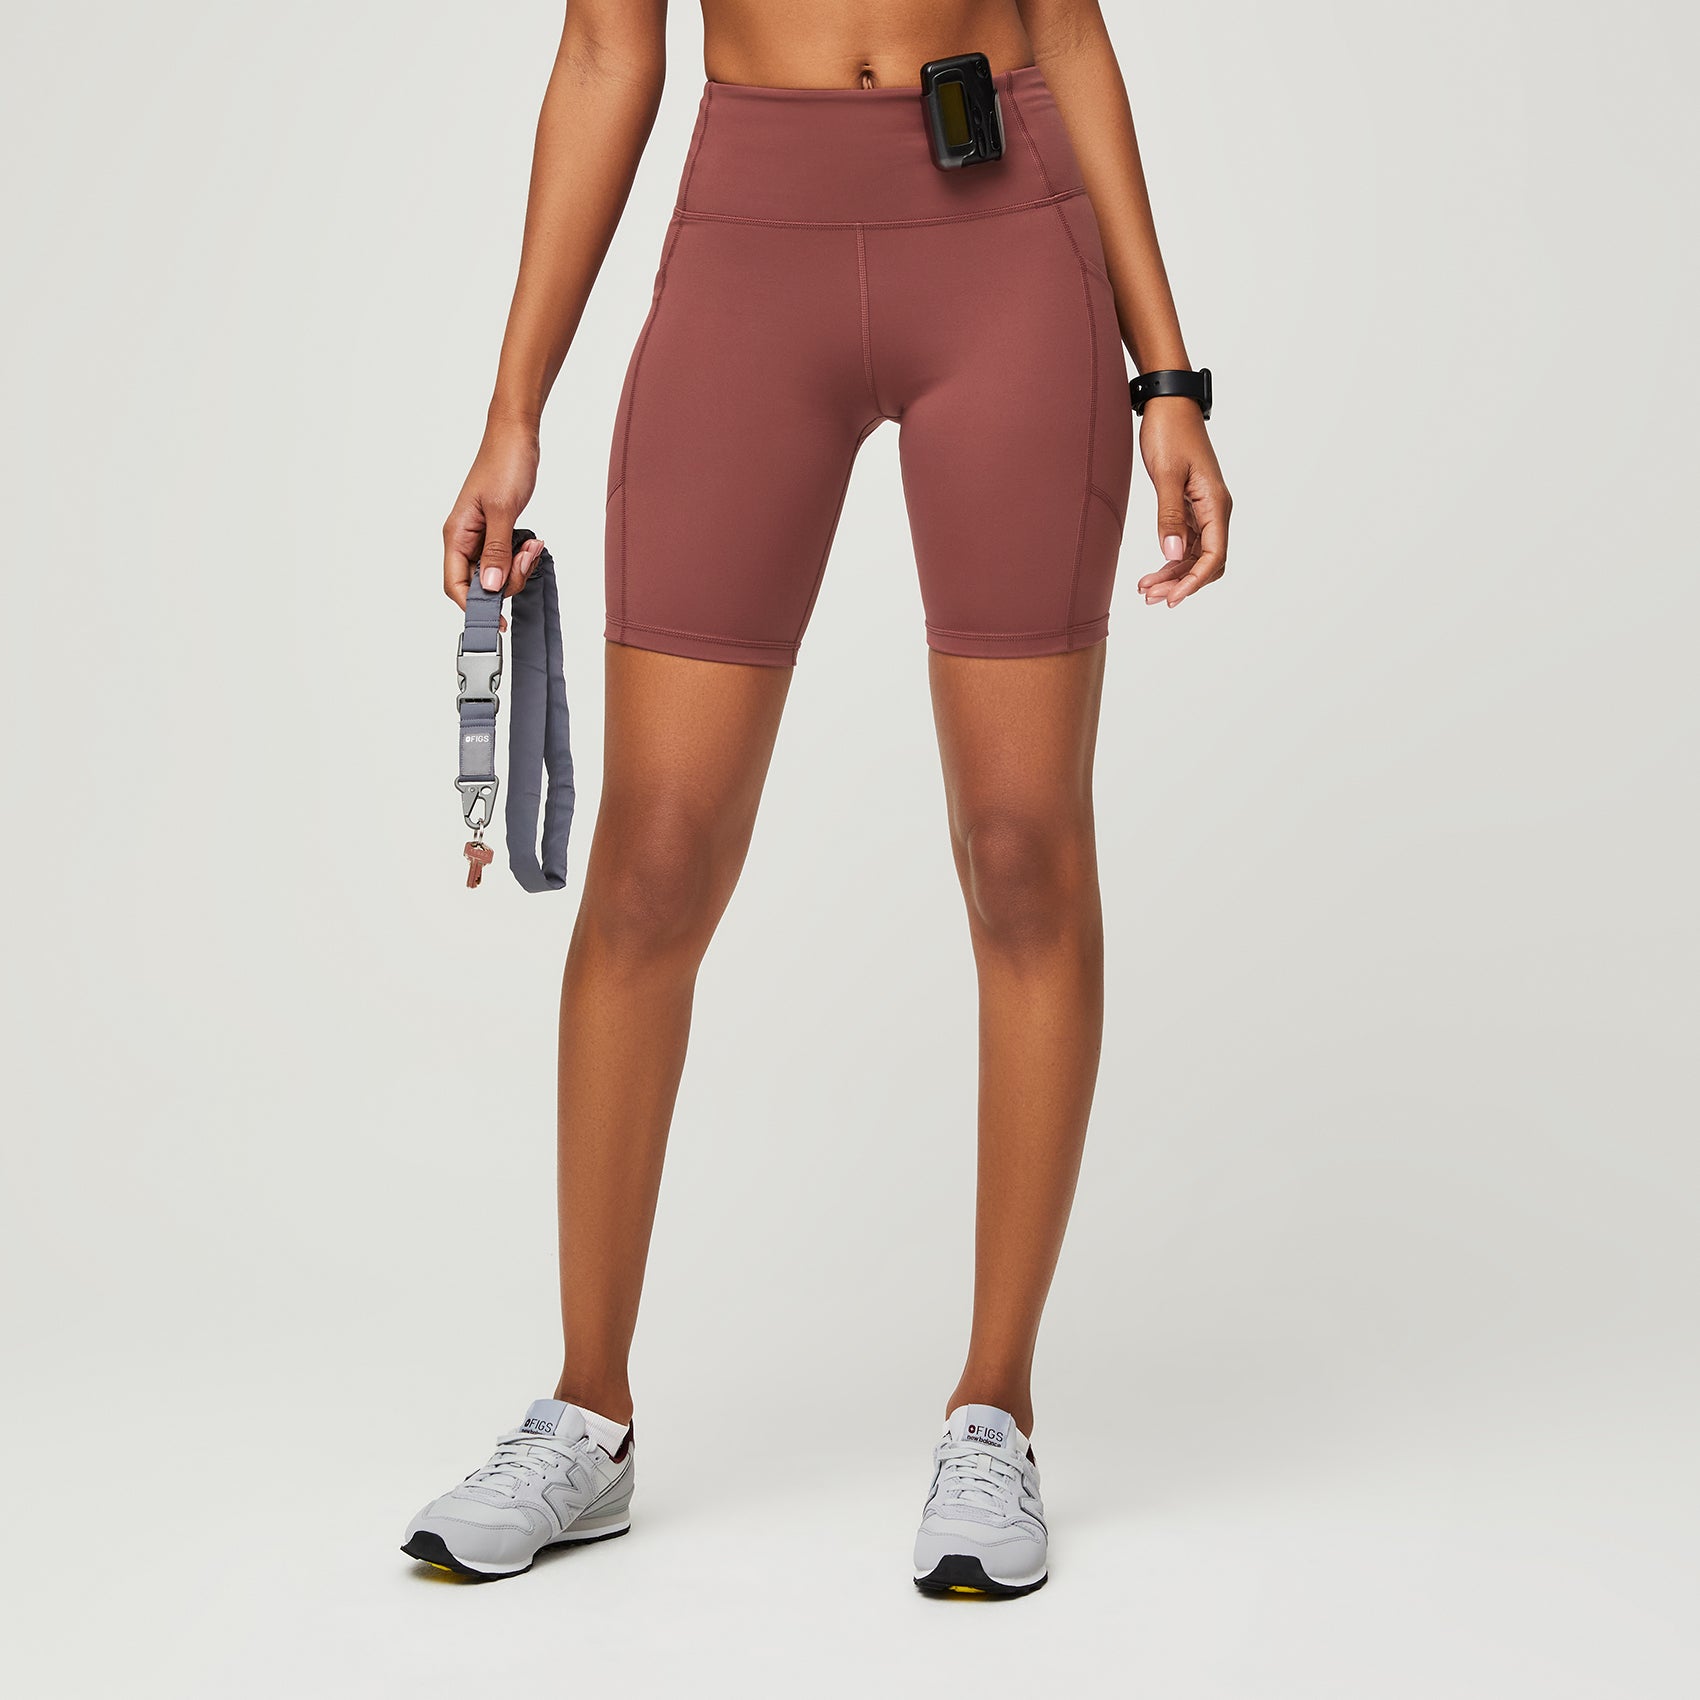 WEAR FIGS: Try On Haul Petite+ Review of The Performance Underscrub (Sports  Bra, Short and Legging) 